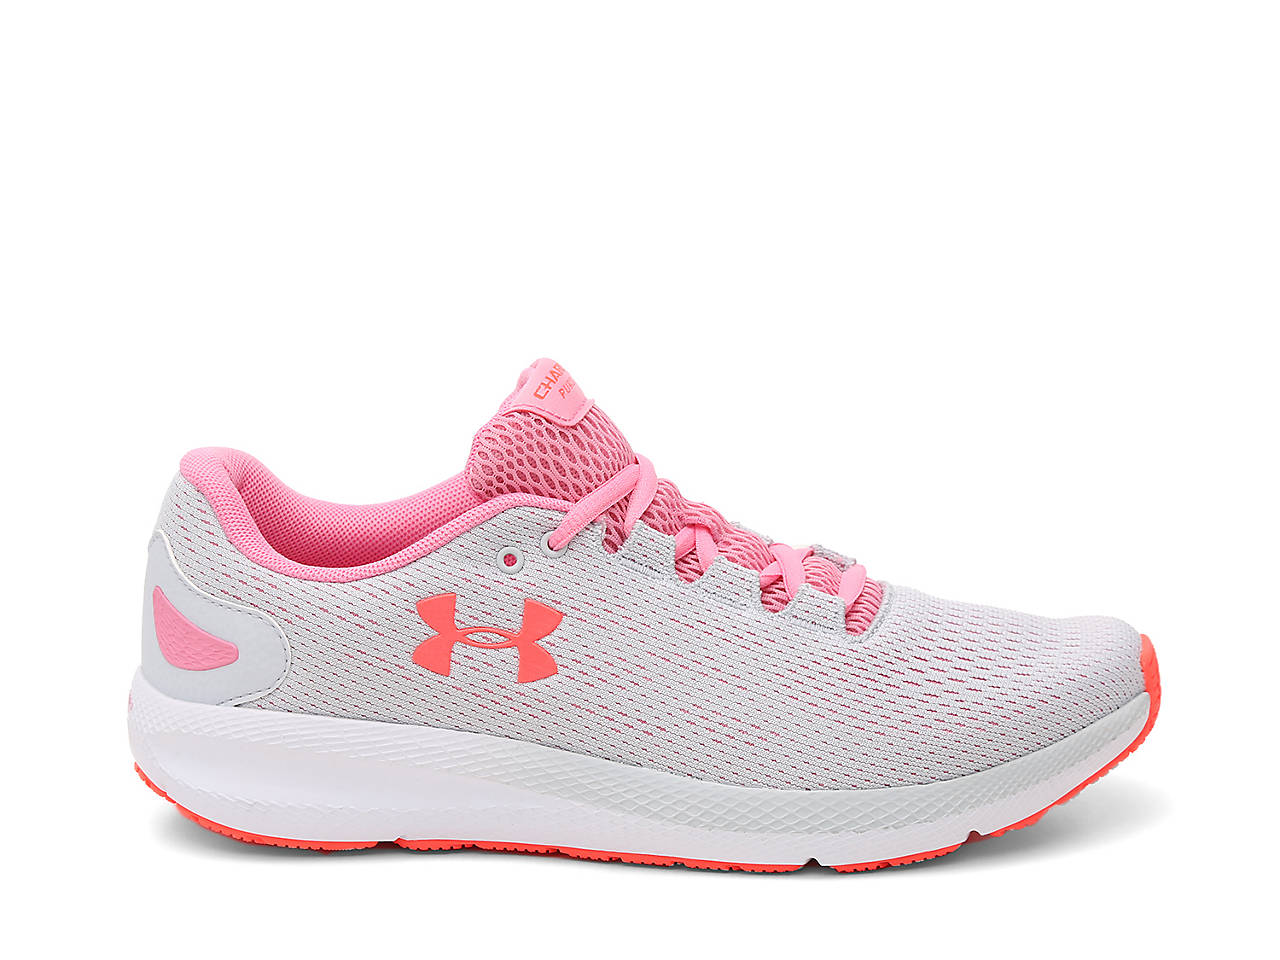 Under Armour Charged Pursuit 2 Running Shoe - Women's Women's Shoes | DSW